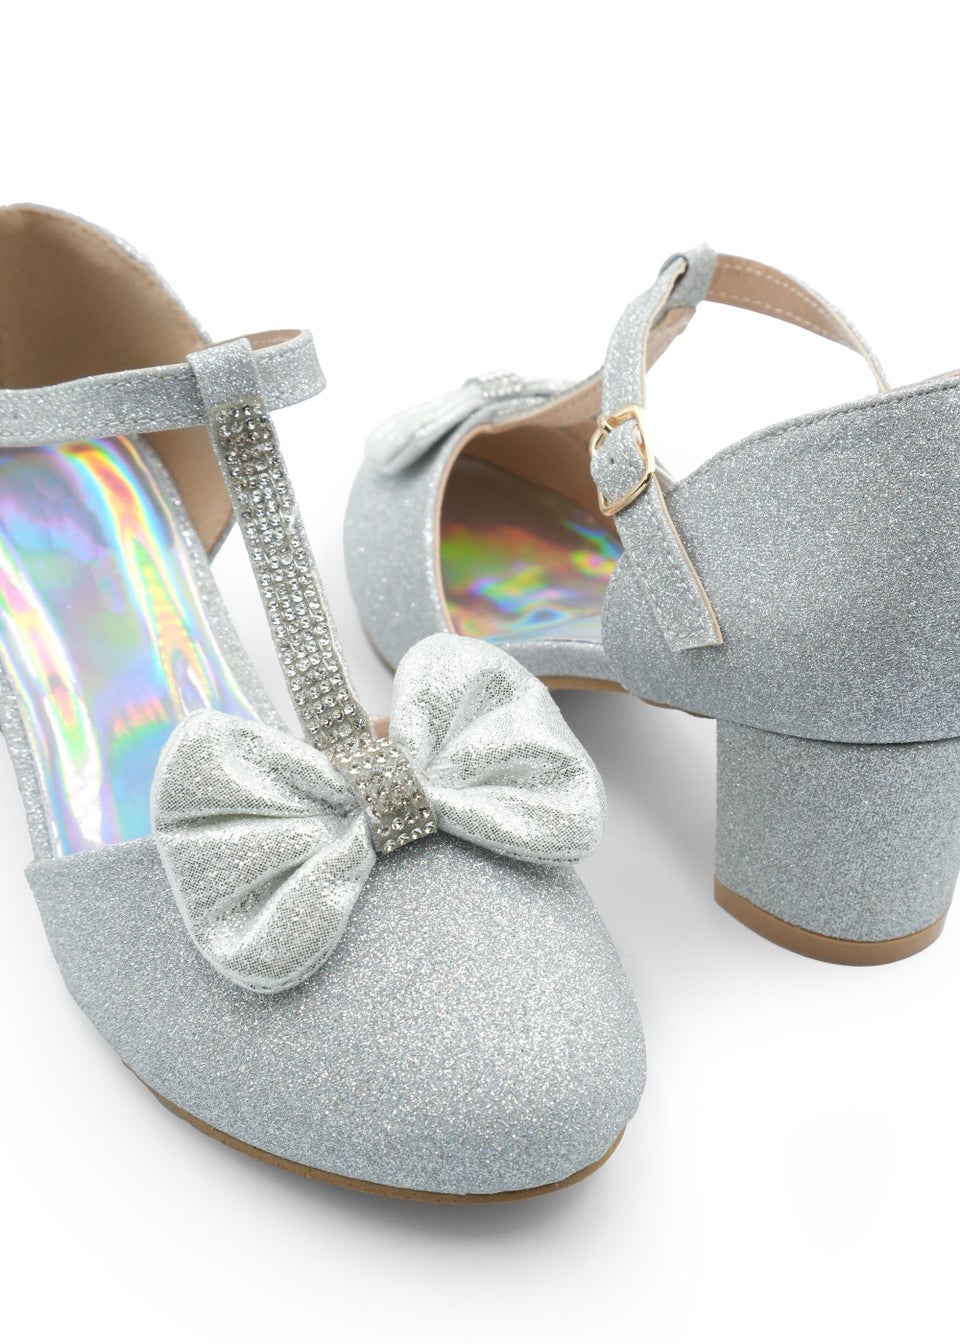 Where's That From Silver Glitter Chava Kids Mid Heel Sandals